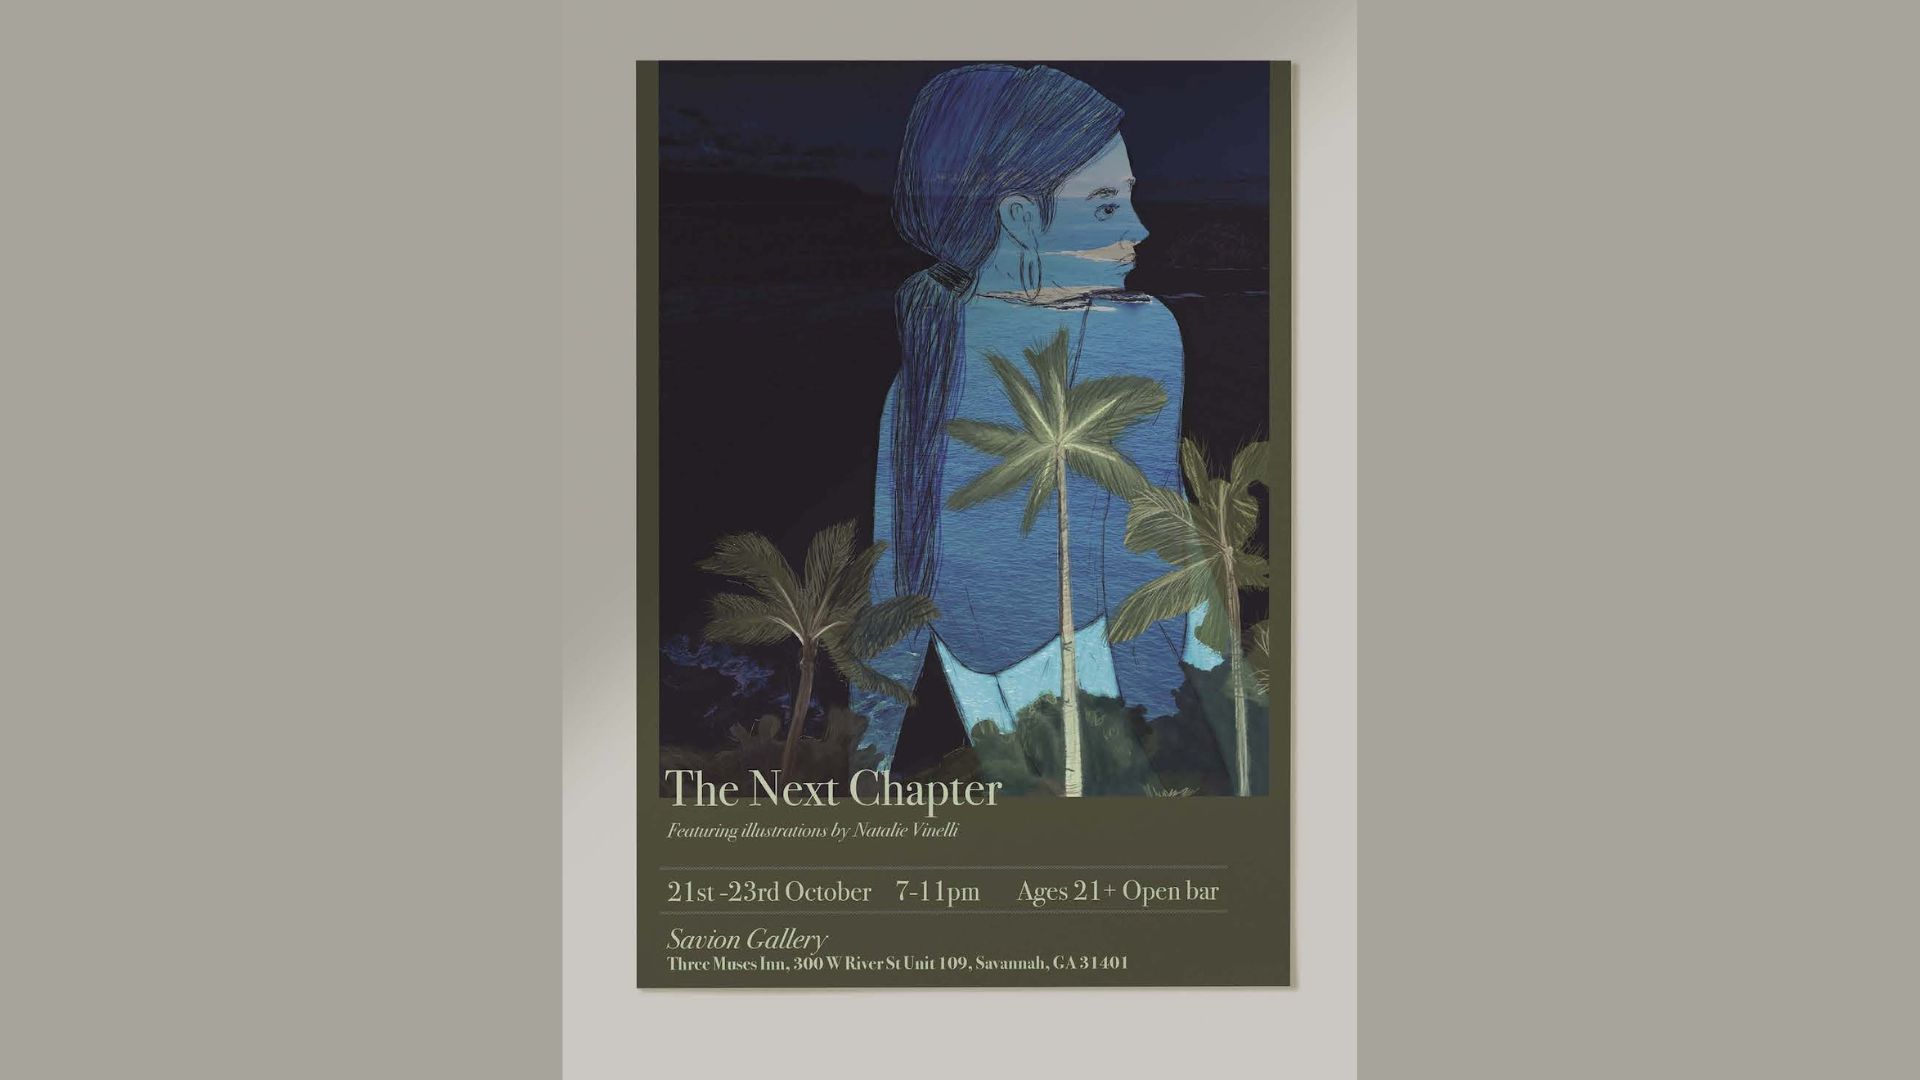 "The Next Chapter," art gallery poster ad / "The Next Chapter," art gallery poster ad, 11 x 17 inches print ad, 2022. This poster invites guests to come enjoy my gallery showing. 